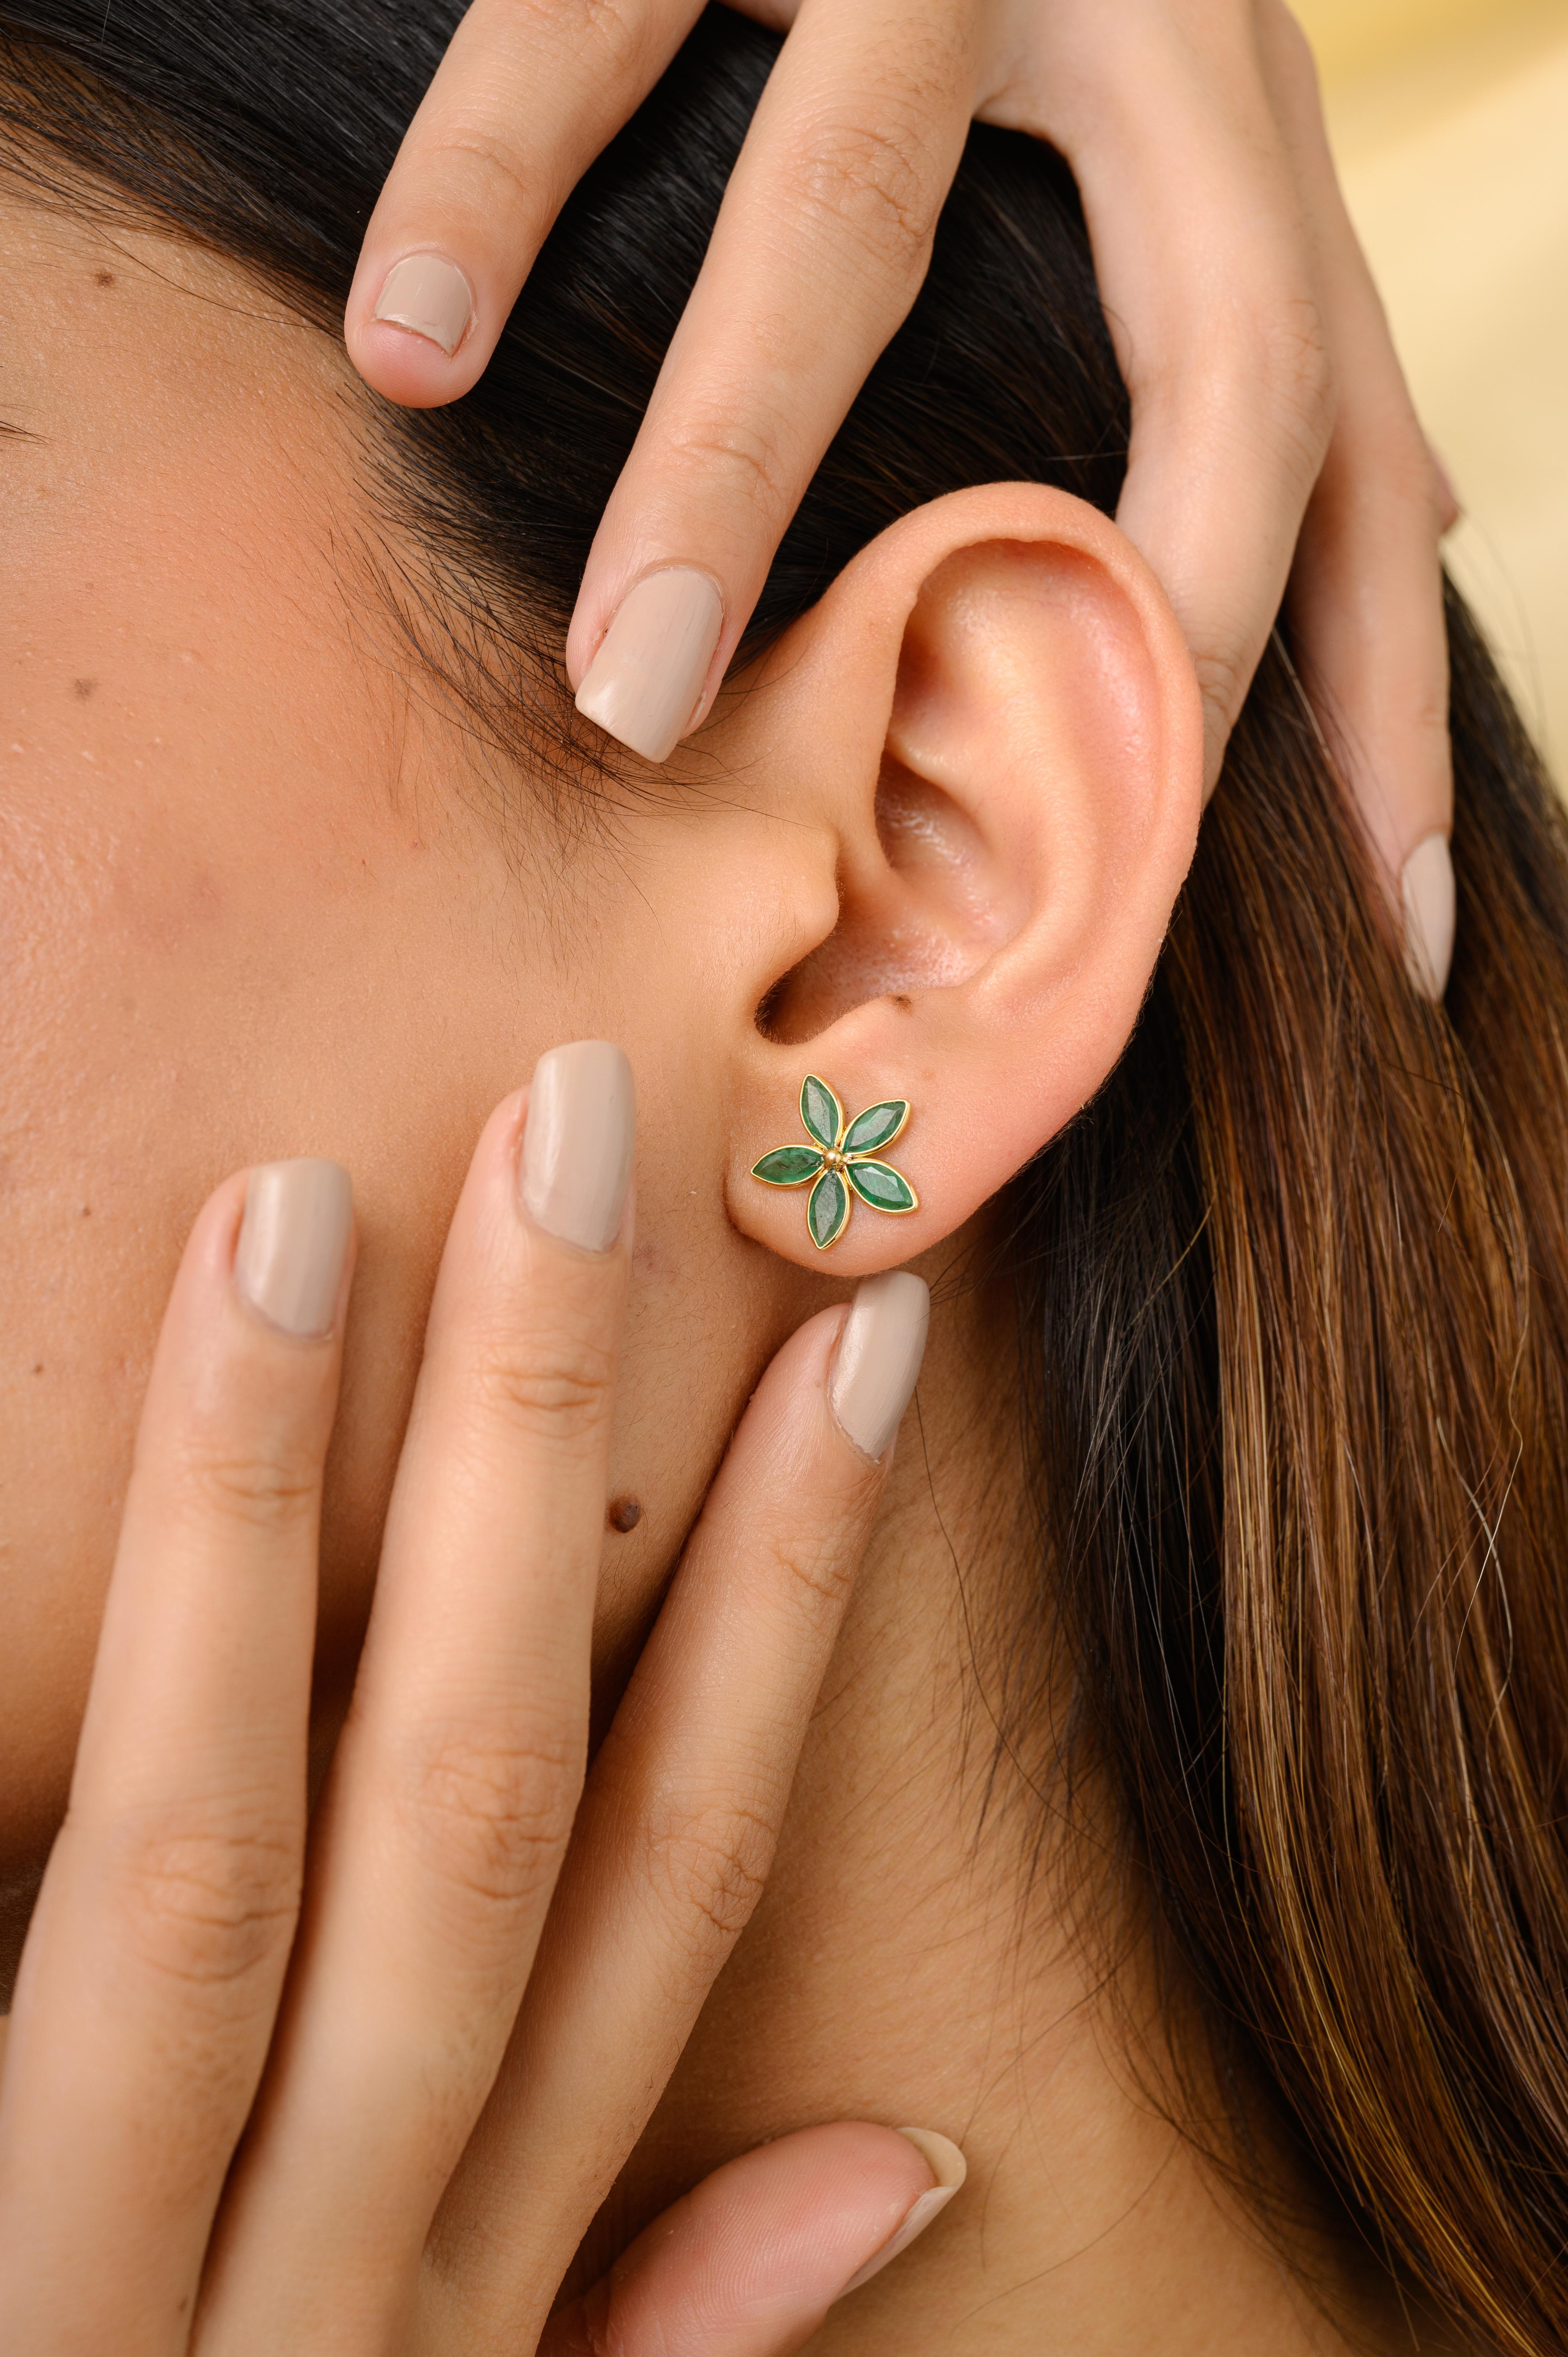 Emerald Flower Everyday Stud Earrings in 18K Gold to make a statement with your look. You shall need studs earrings to make a statement with your look. These earrings create a sparkling, luxurious look featuring marquise cut emerald.
Emerald